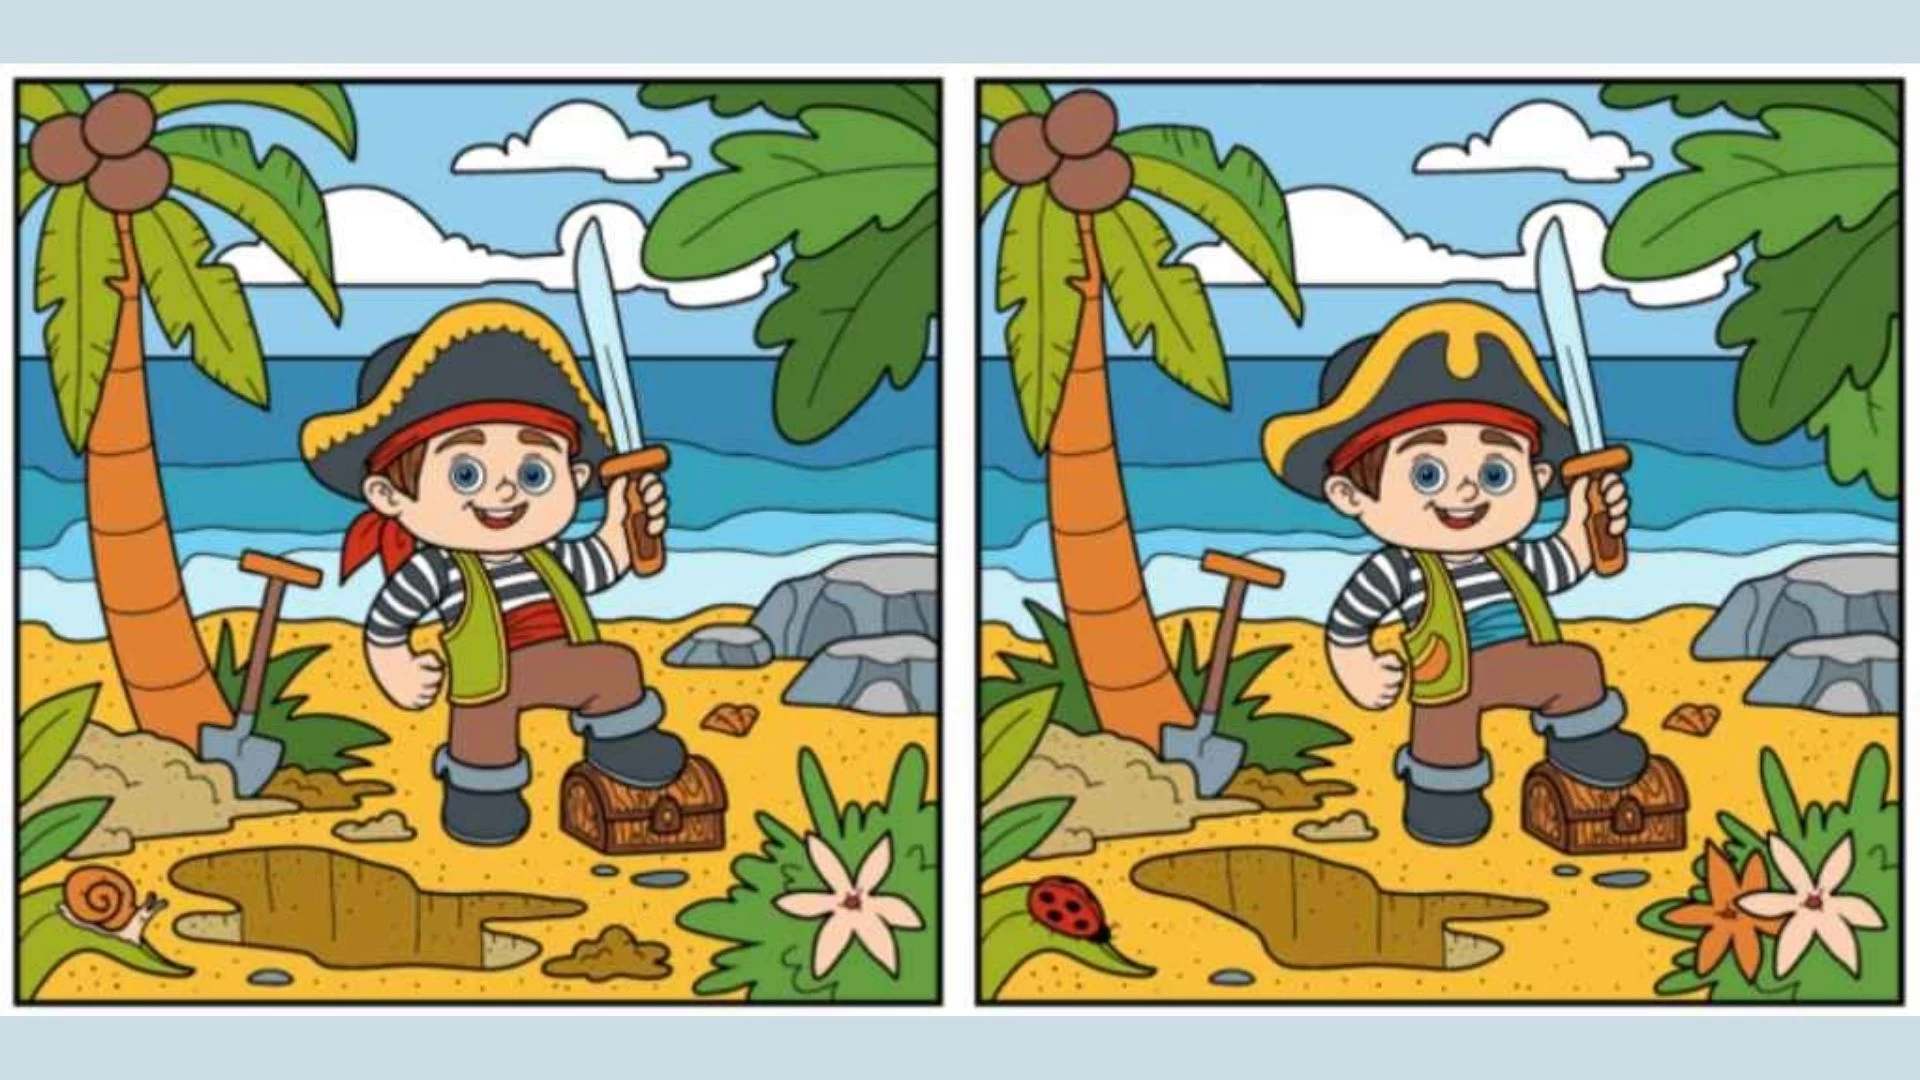 Only Sharp-Eyed People Can Find the 12 Differences Between the Pirate Boy Pictures in 35 Seconds!